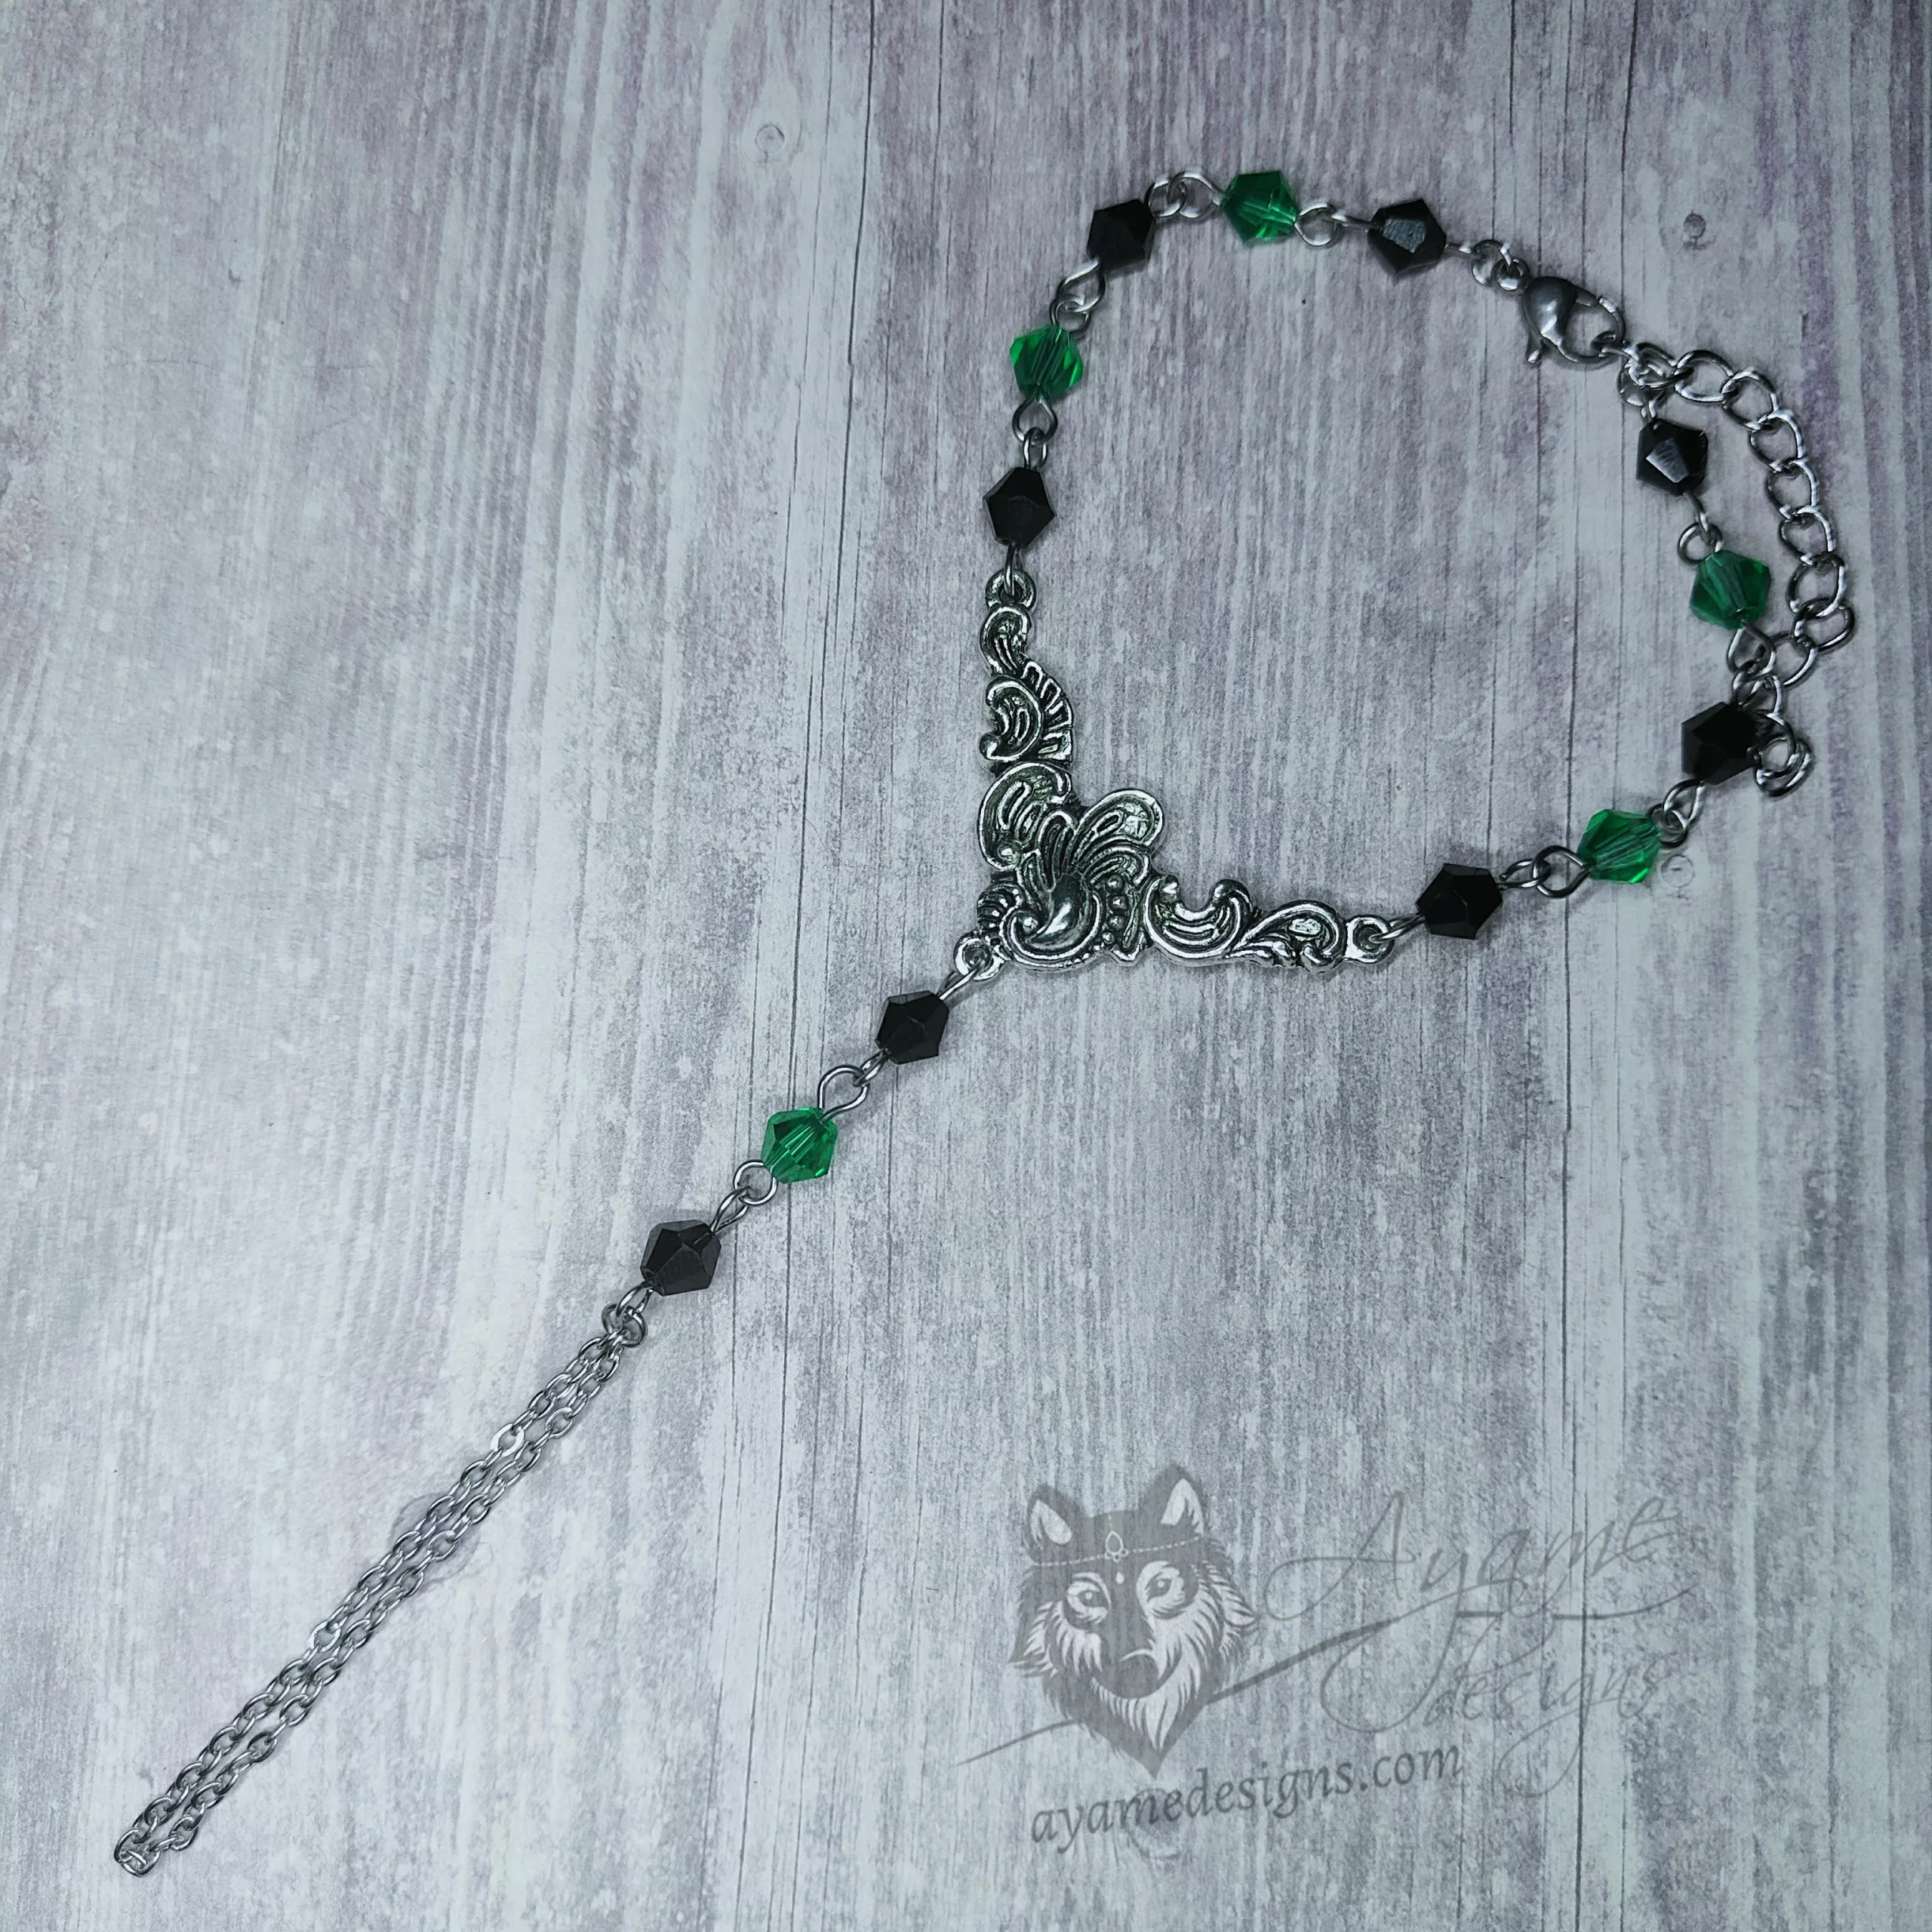 Handmade gothic hand bracelet with a filigree pendant, and black and green Austrian crystal beads